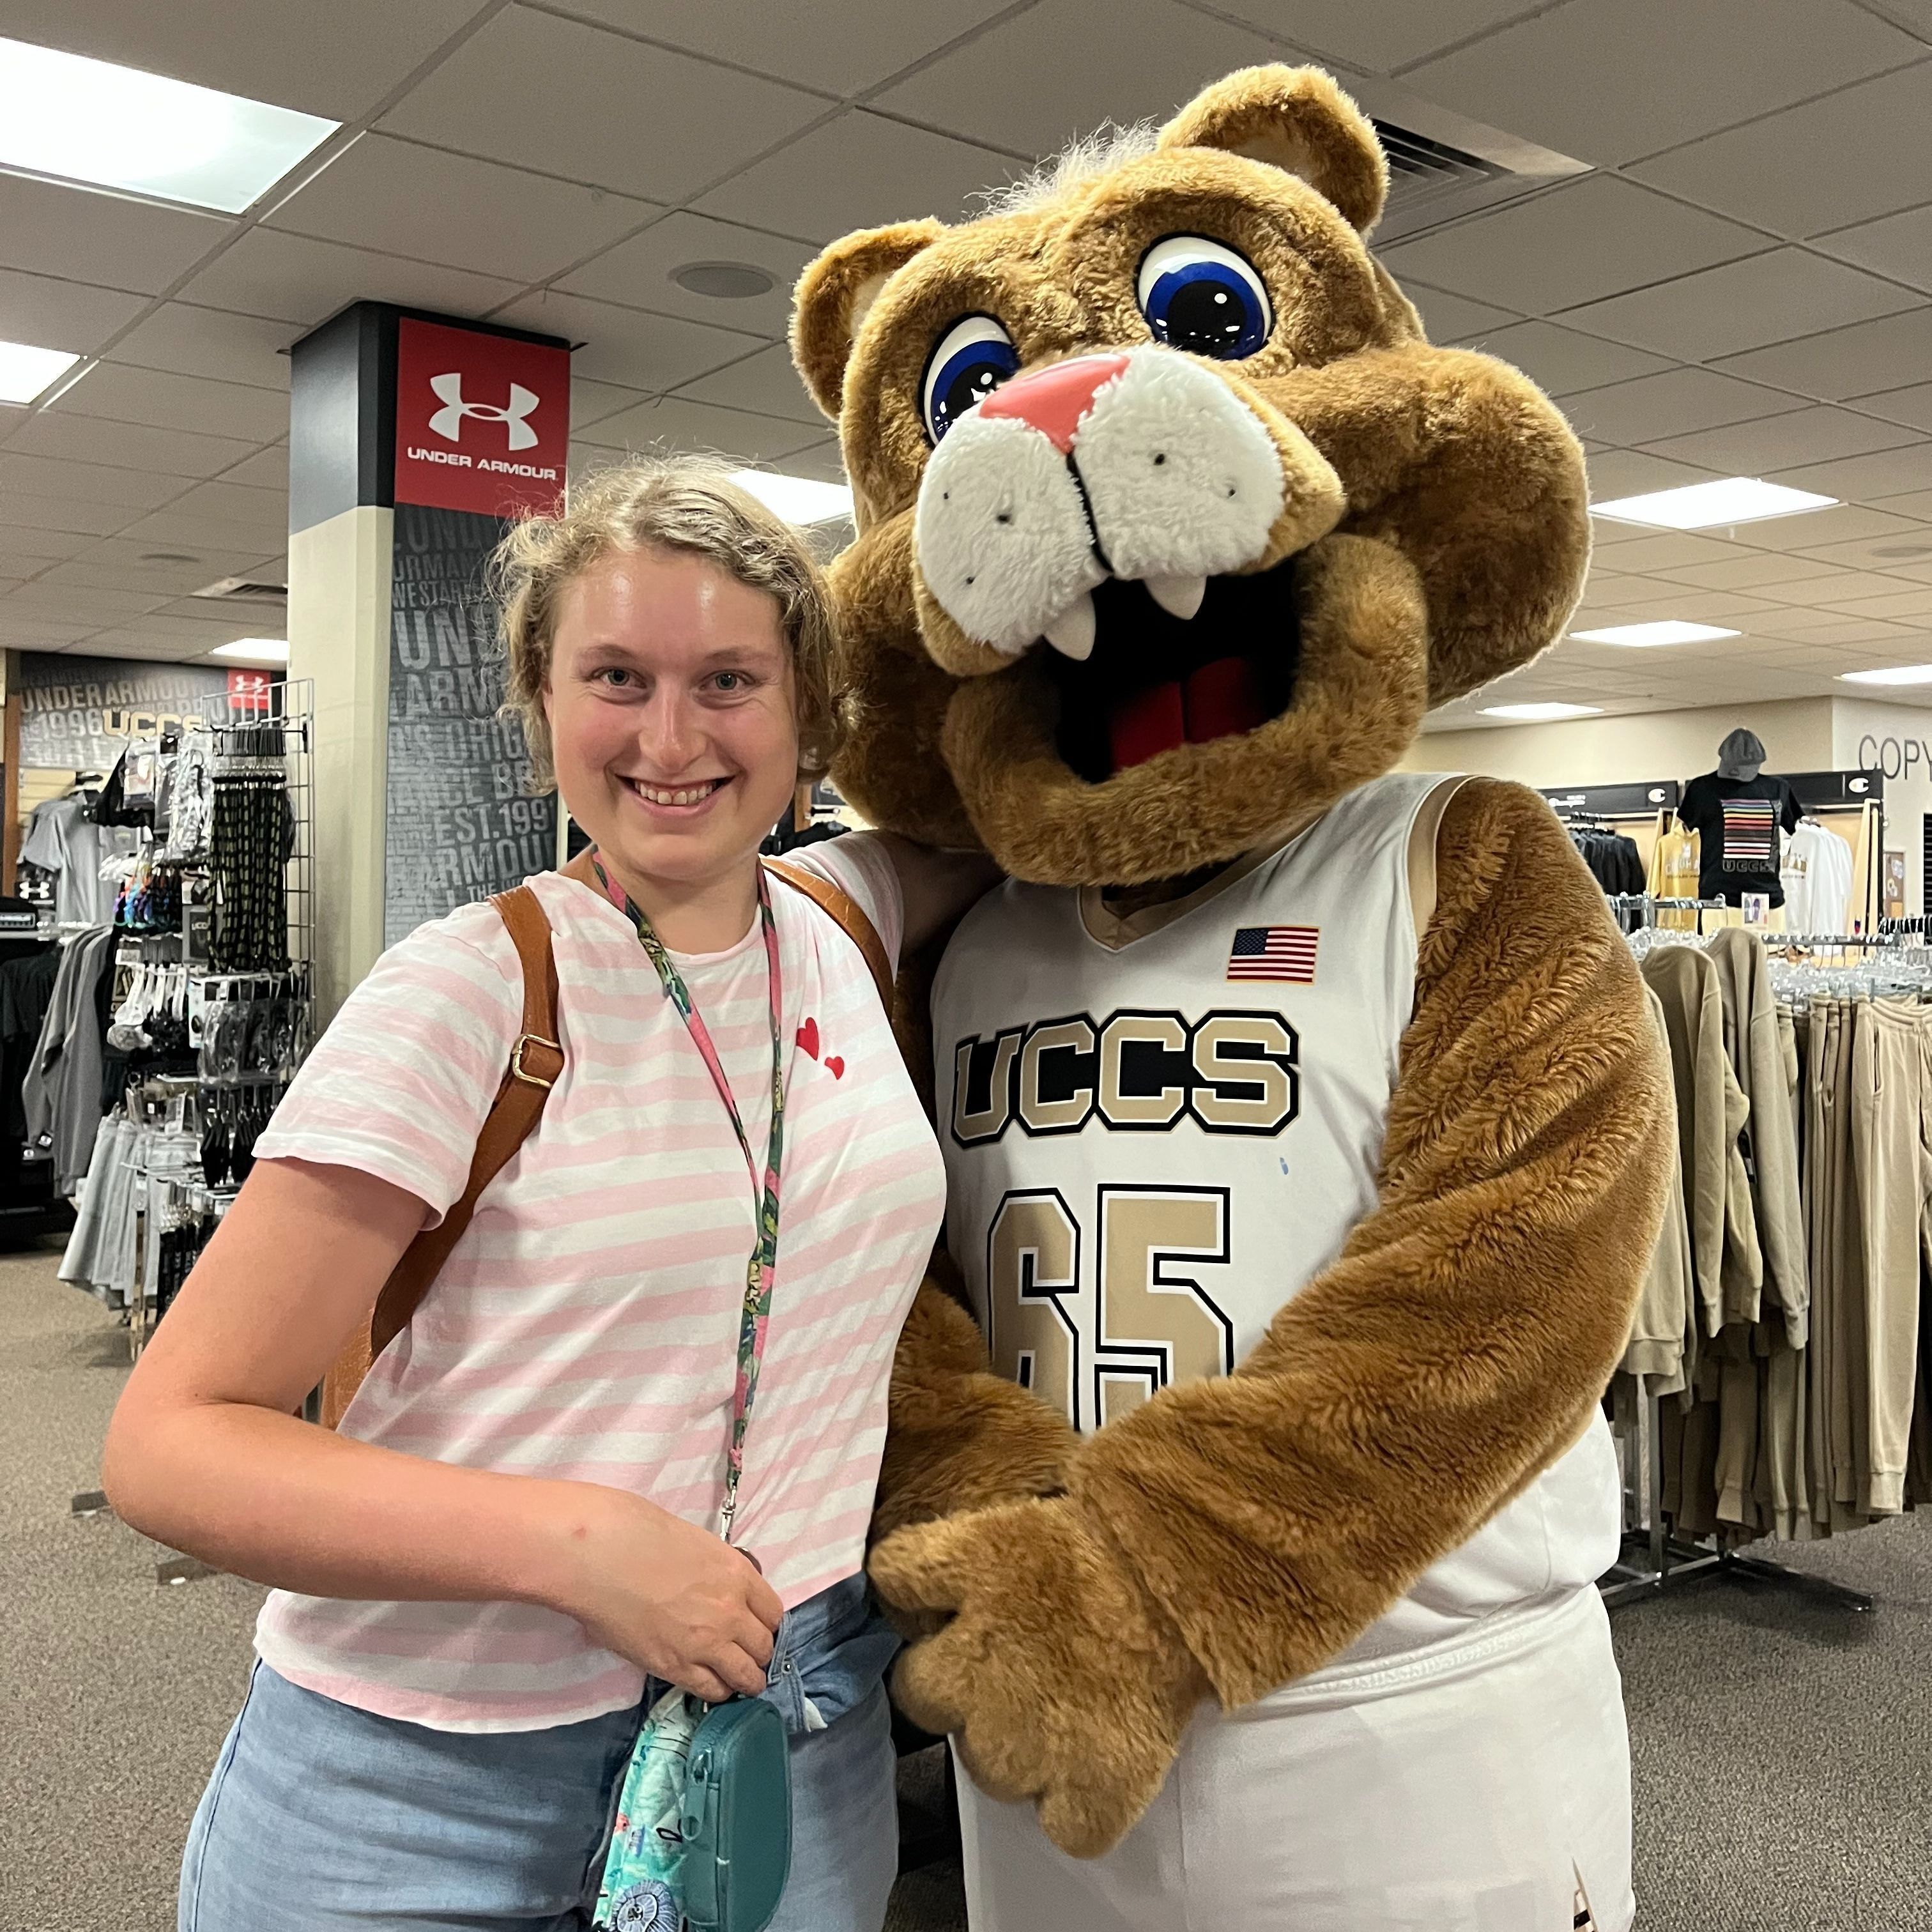 Makena wears a white and pink striped shirt. She stands with the UCCS mountain lion mascot and smiles.